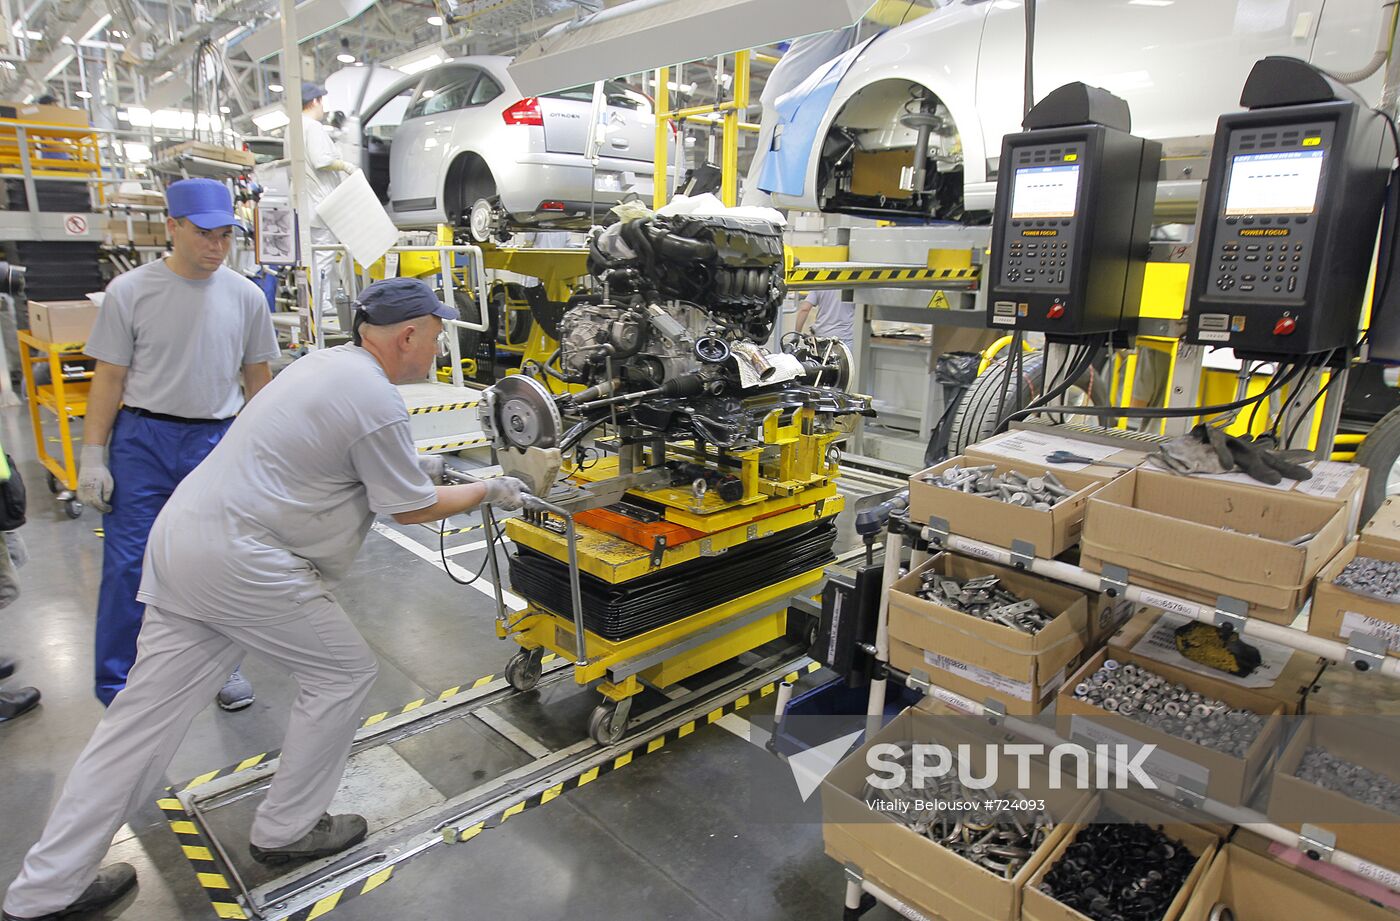 Citroen launches car assembly in Kaluga